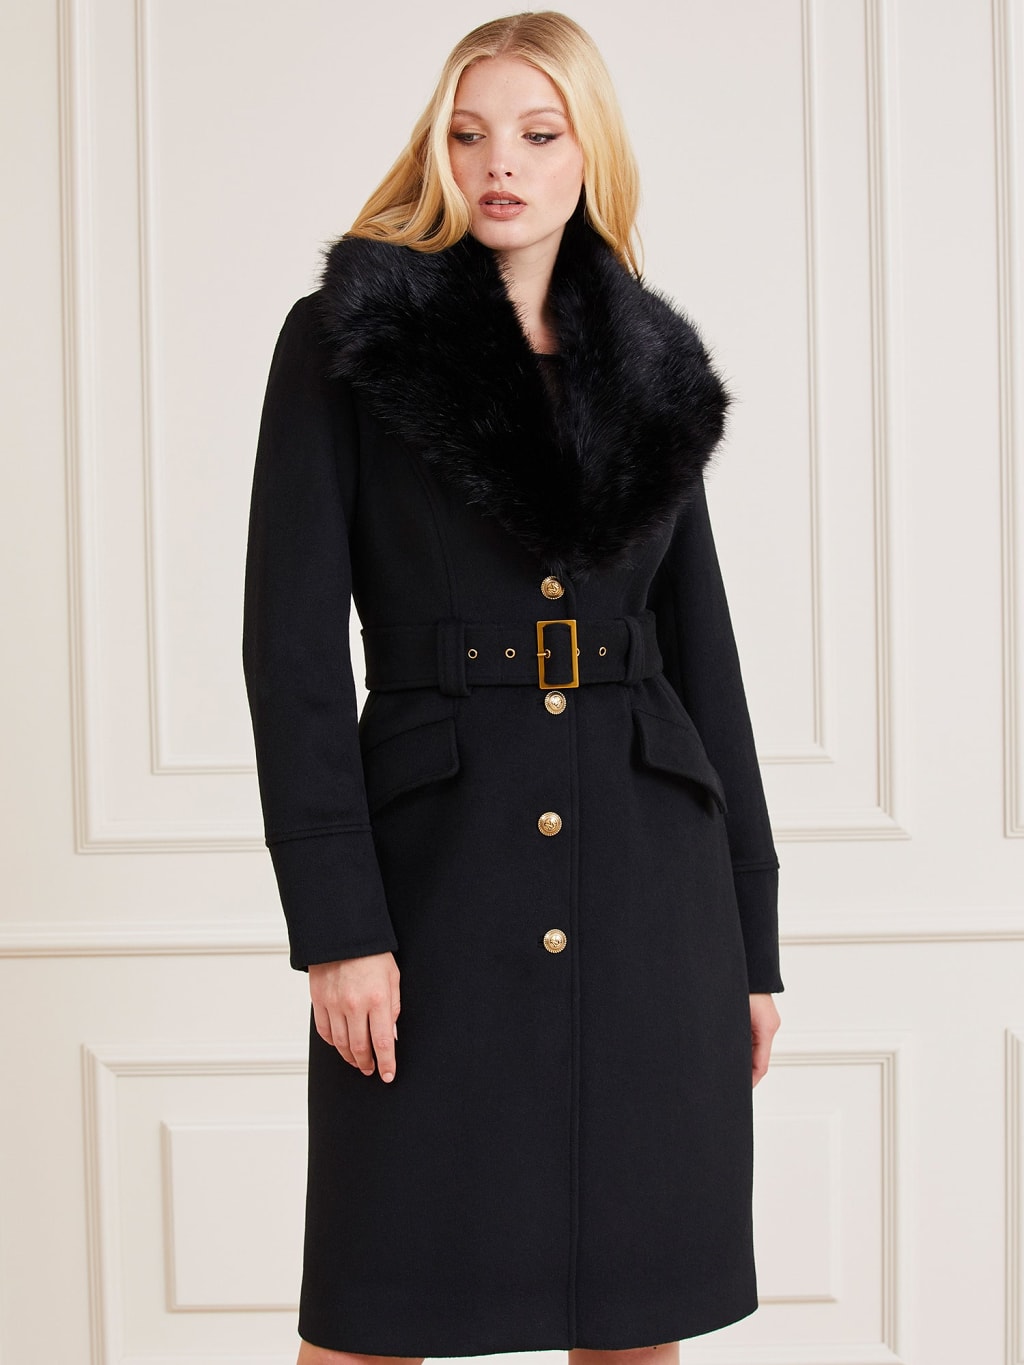 WOOL BLEND COAT | MARCIANO Guess®